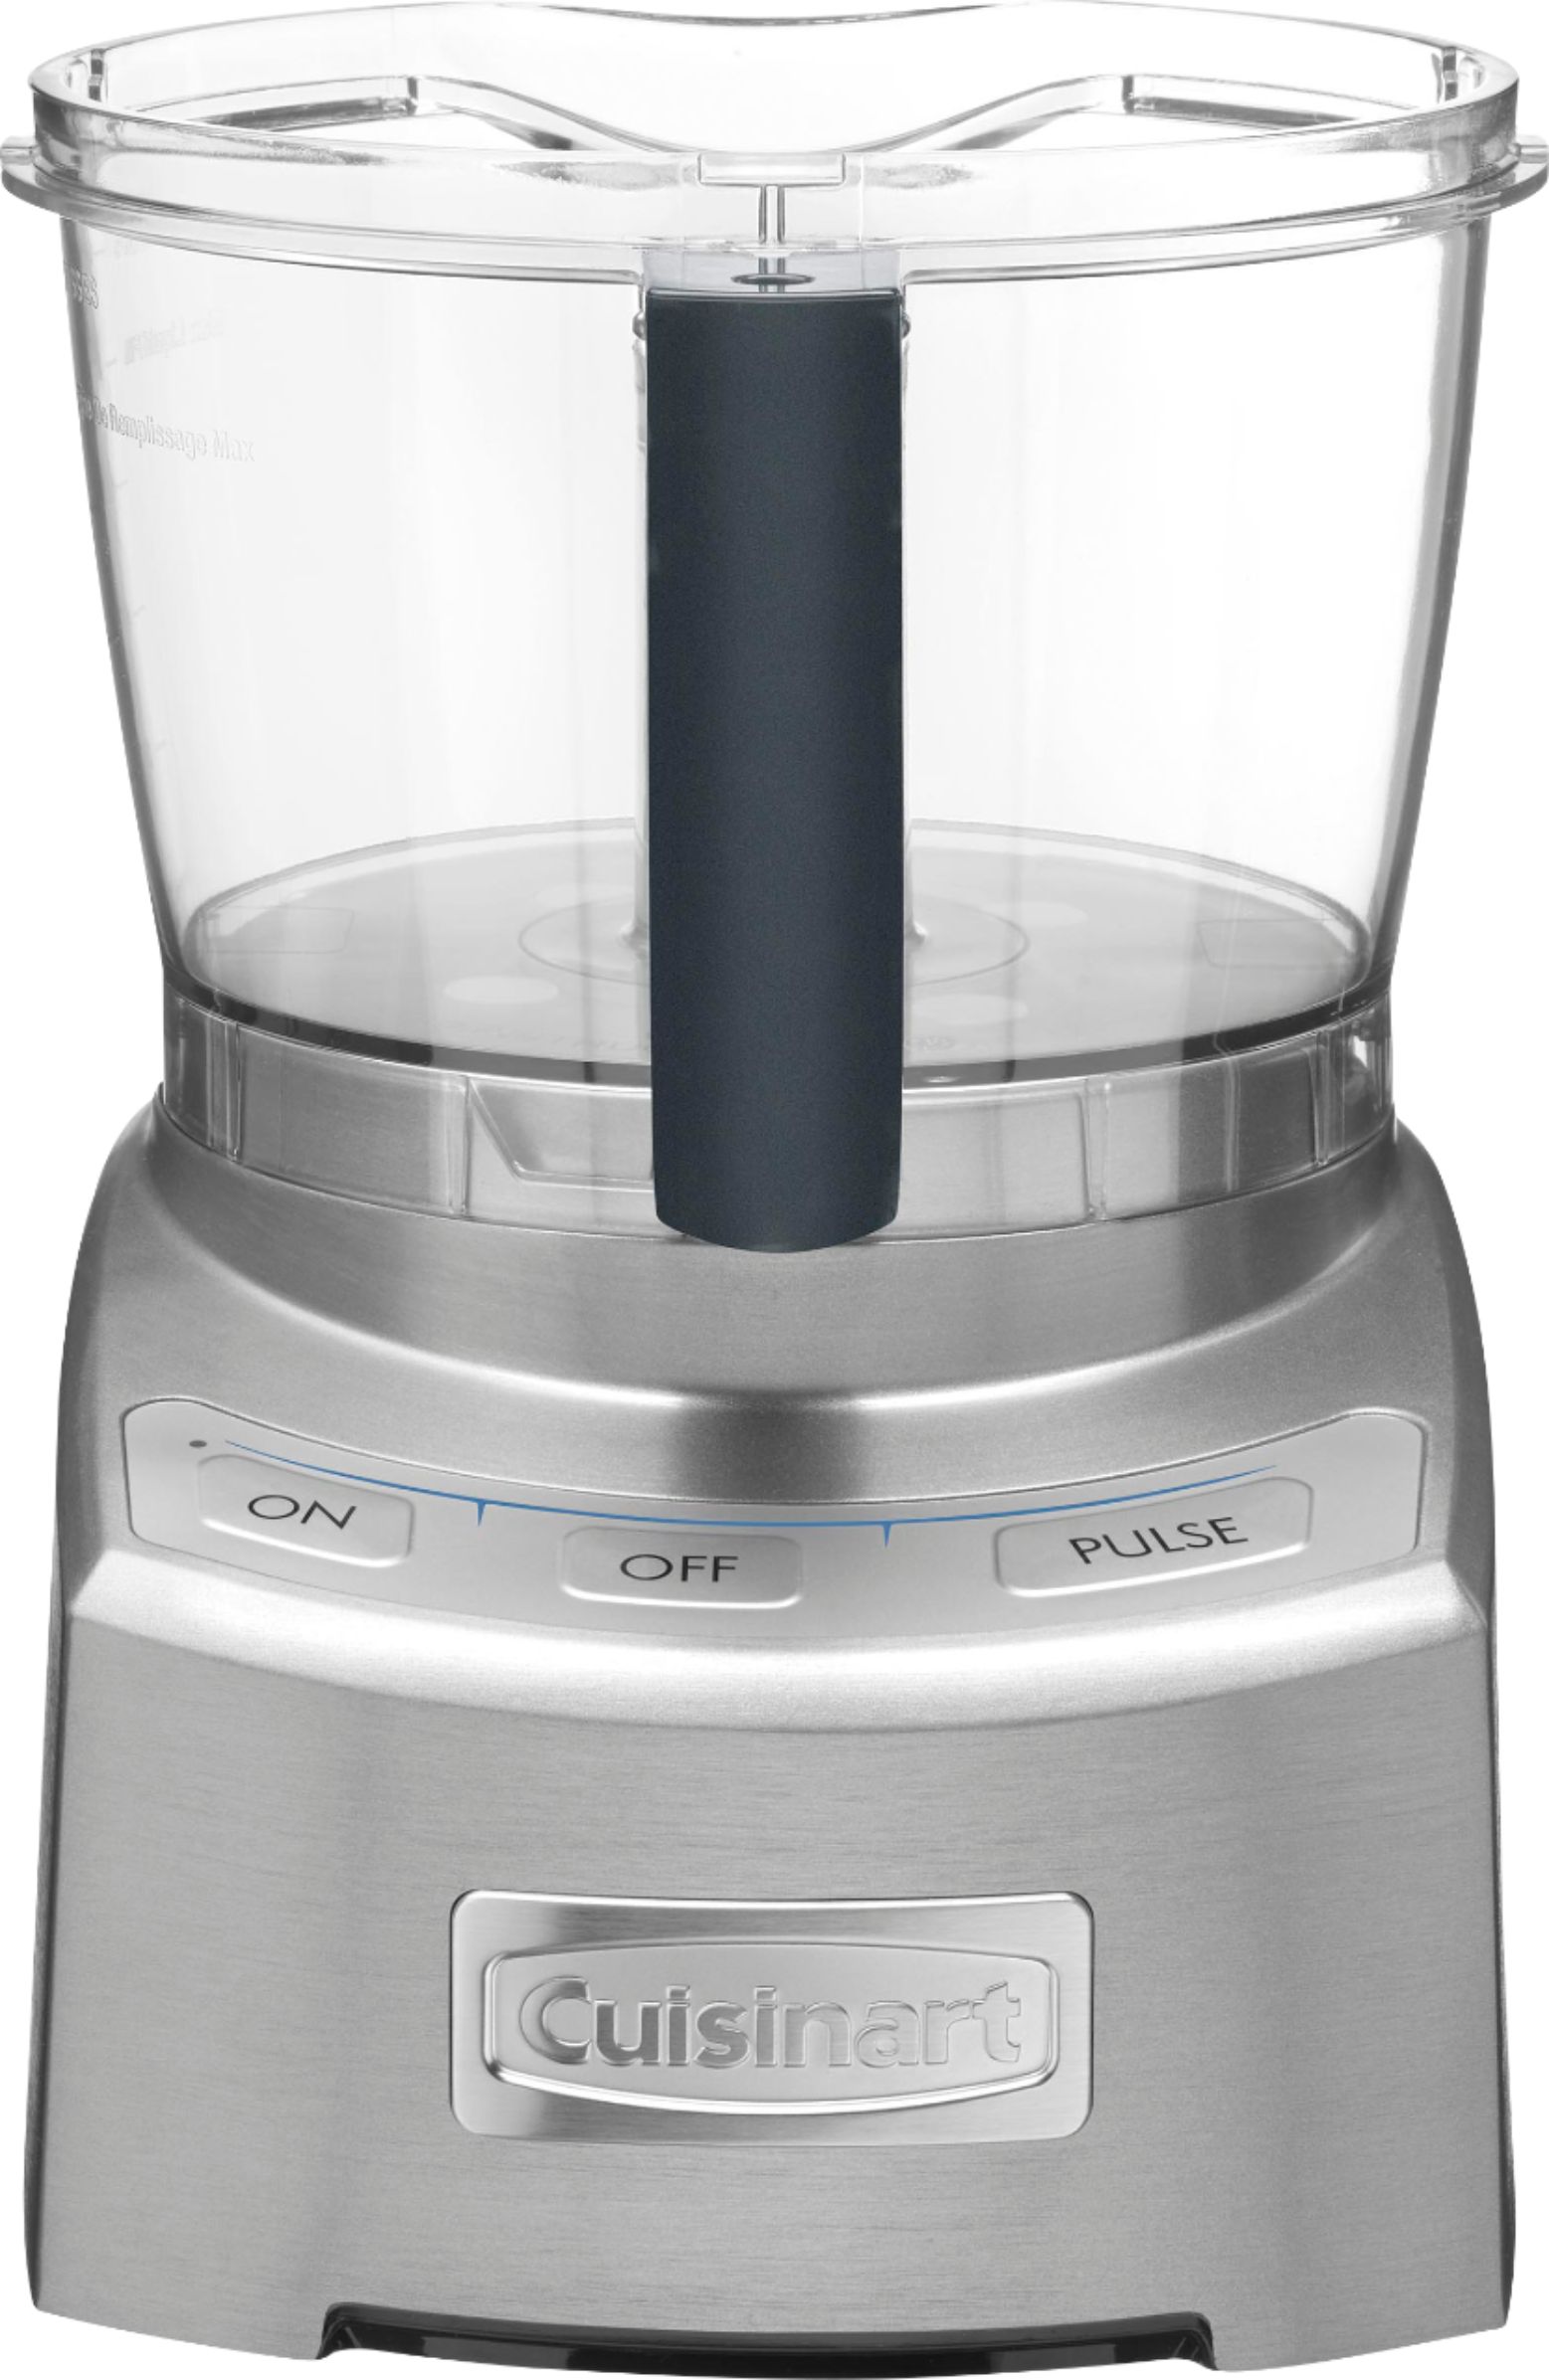 Angle View: Cuisinart Elite Collection 2.0 FP-12DCN 12 Cup Food Processor, Die Cast Silver